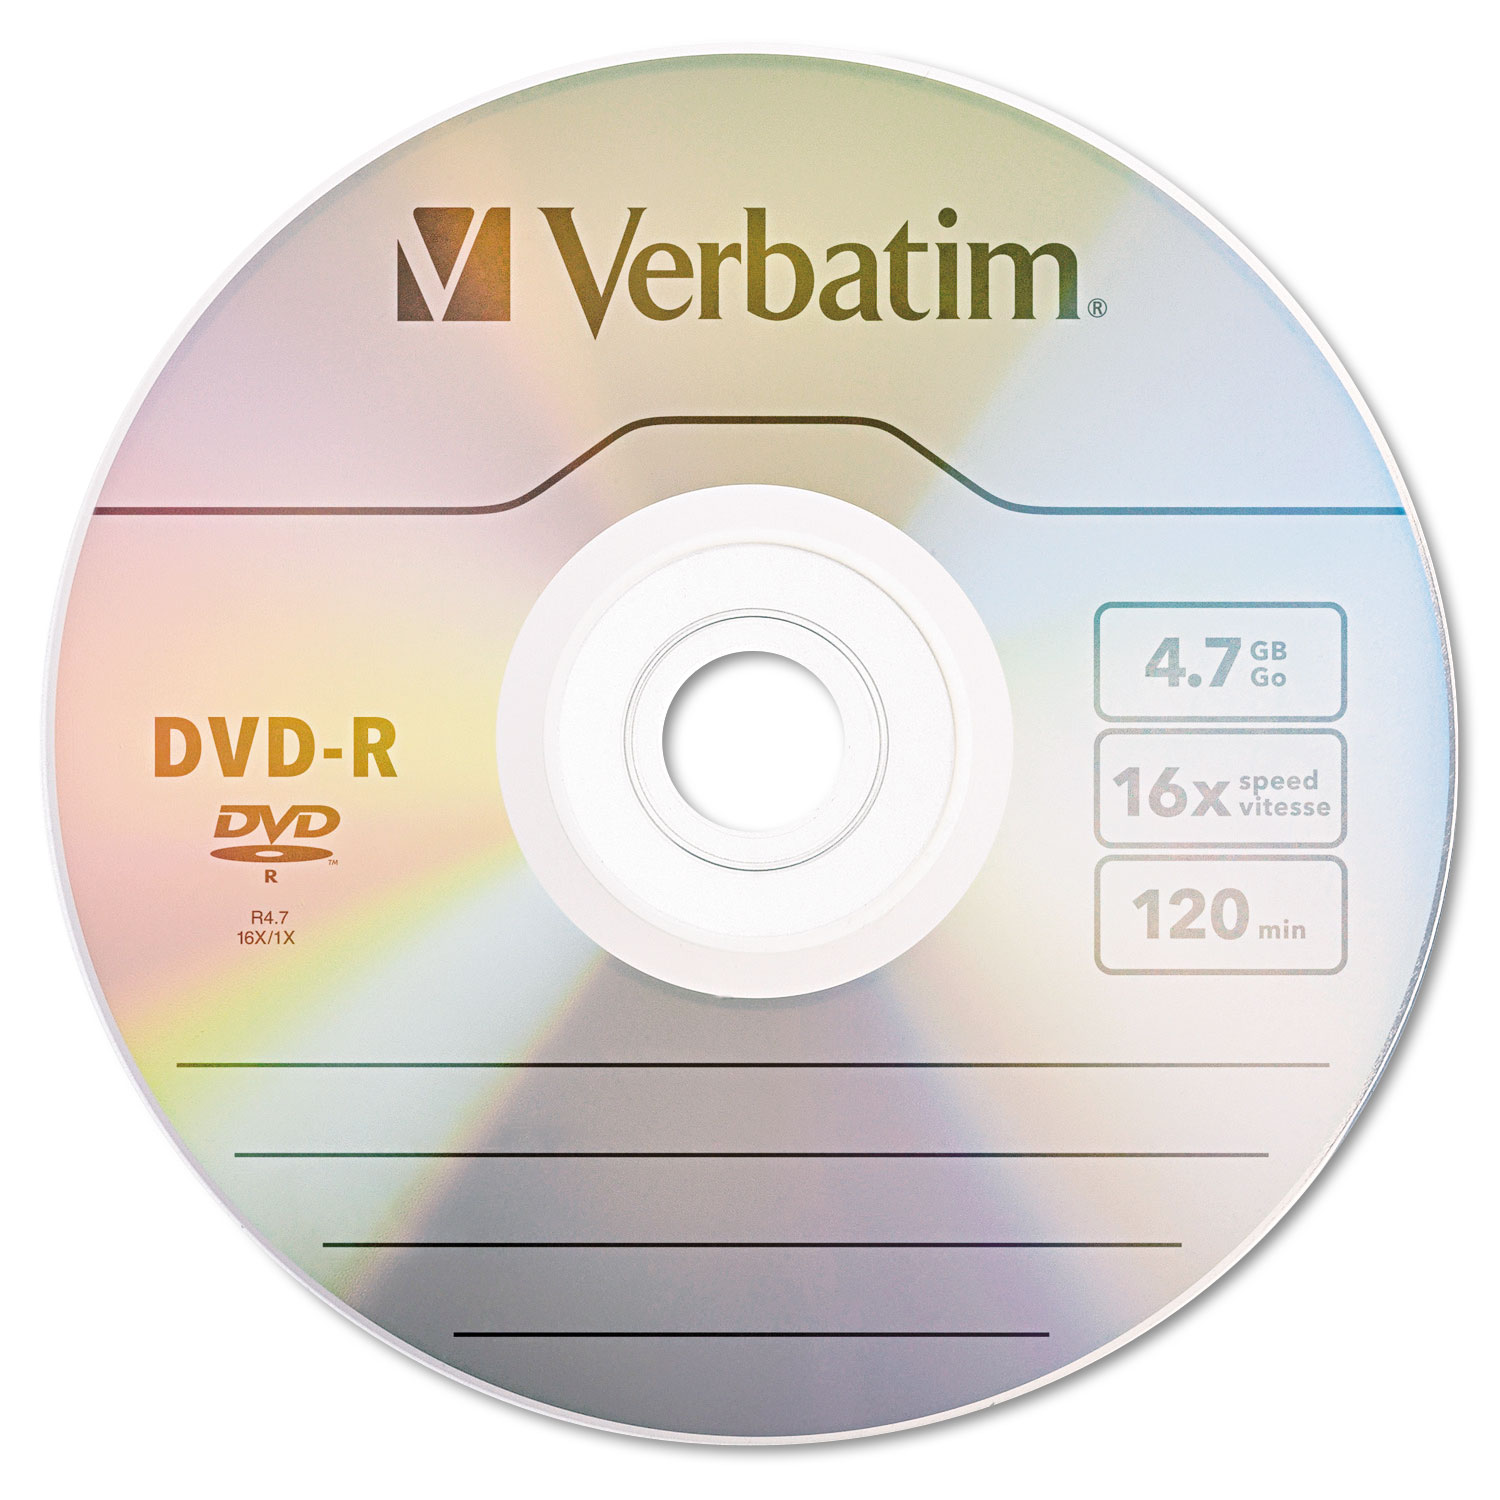 DVD-R Discs, 4.7GB, 16x, Spindle, Silver, 50/Pack